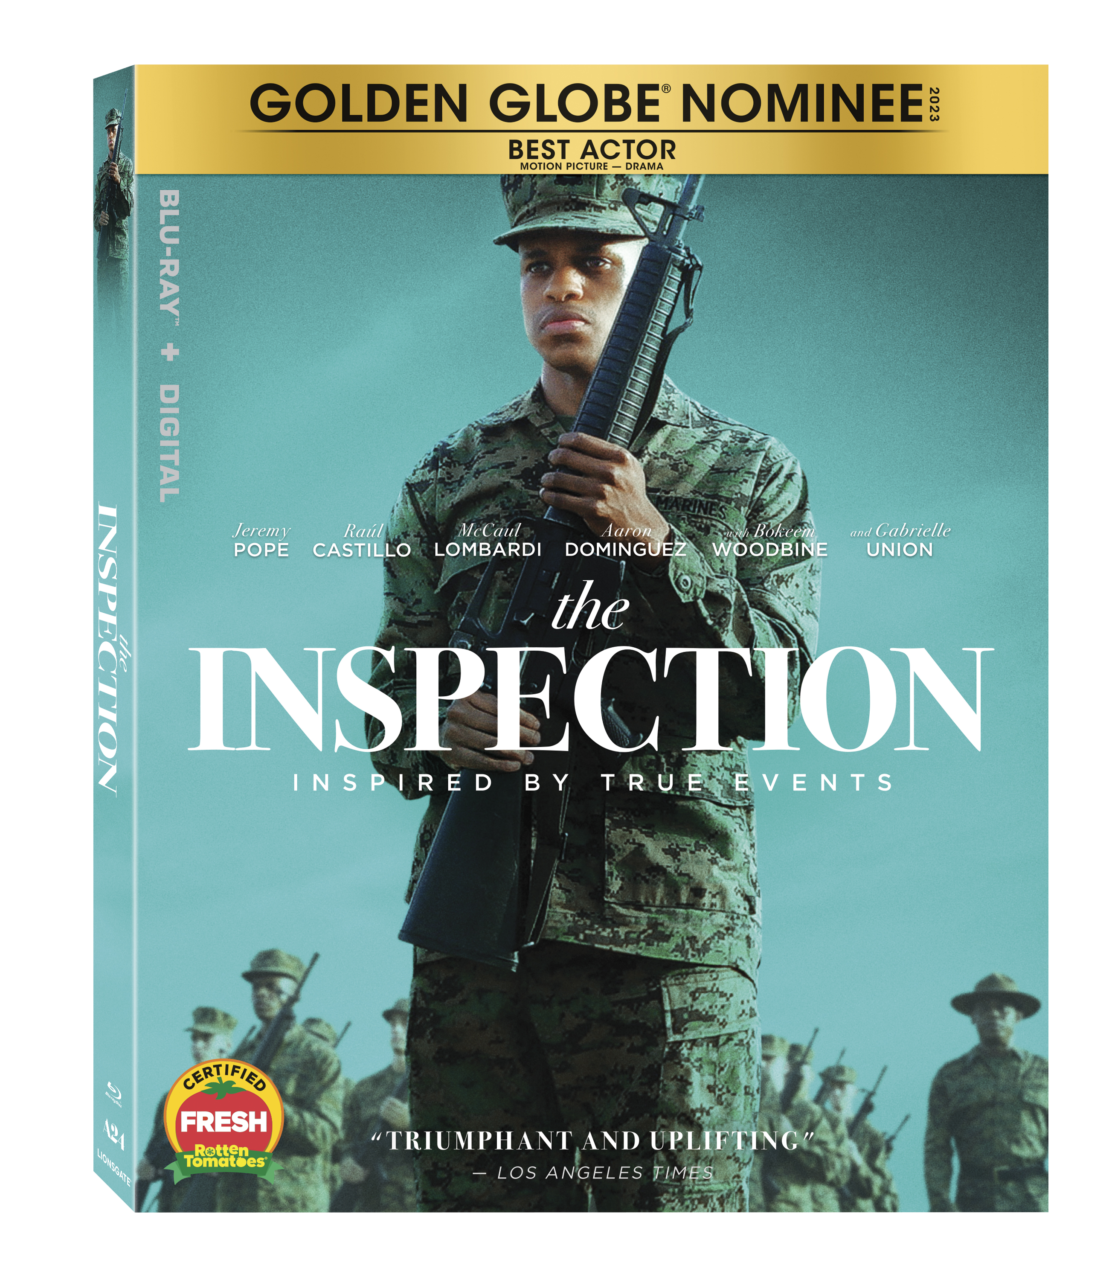 THE INSPECTION Blu-Ray Combo Pack cover (Lionsgate)